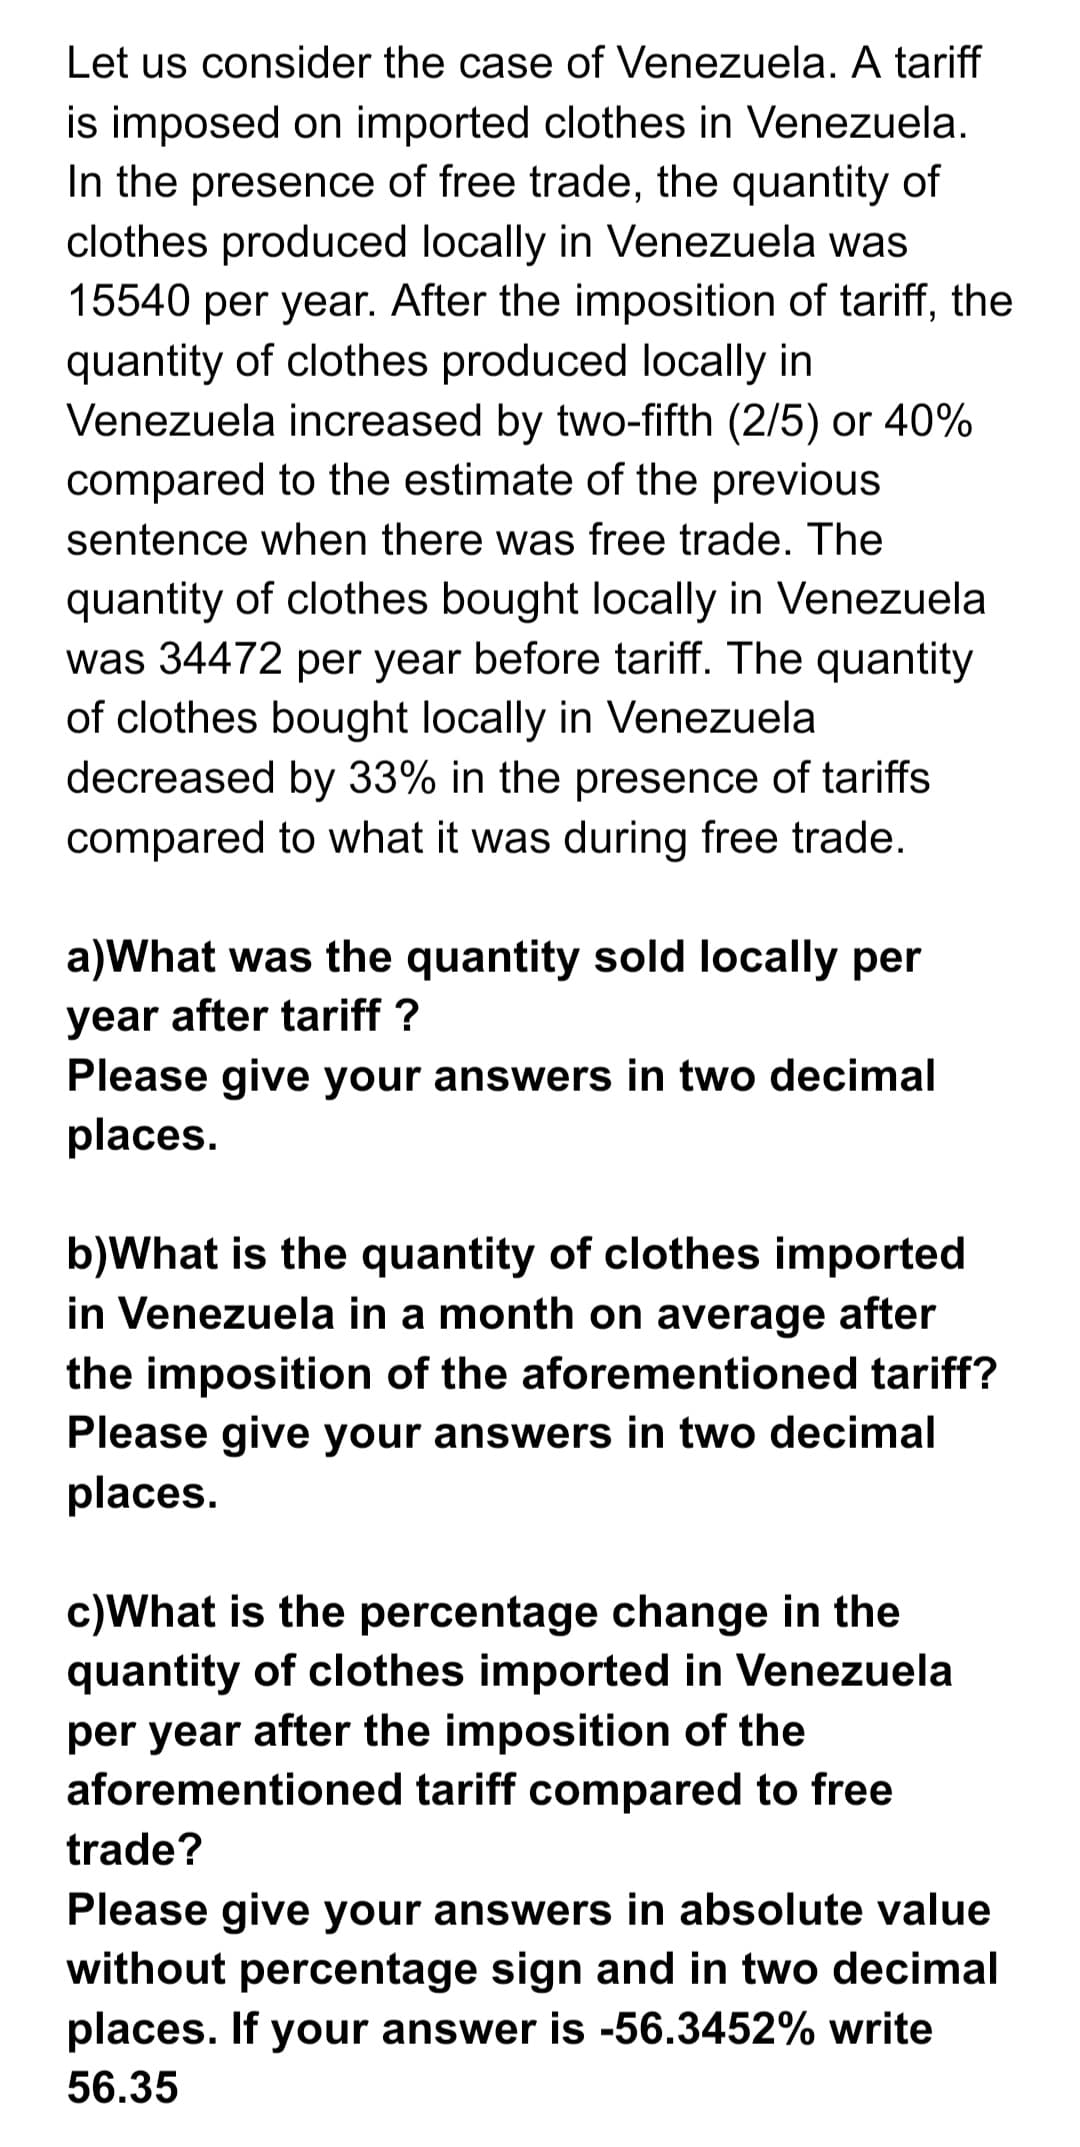 Let us consider the case of Venezuela. A tariff
is imposed on imported clothes in Venezuela.
In the presence of free trade, the quantity of
clothes produced locally in Venezuela was
15540 per year. After the imposition of tariff, the
quantity of clothes produced locally in
Venezuela increased by two-fifth (2/5) or 40%
compared to the estimate of the previous
sentence when there was free trade. The
quantity of clothes bought locally in Venezuela
was 34472 per year before tariff. The quantity
of clothes bought locally in Venezuela
decreased by 33% in the presence of tariffs
compared to what it was during free trade.
a)What was the quantity sold locally per
year after tariff ?
Please give your answers in two decimal
places.
b)What is the quantity of clothes imported
in Venezuela in a month on average after
the imposition of the aforementioned tariff?
Please give your answers in two decimal
places.
c)What is the percentage change in the
quantity of clothes imported in Venezuela
per year after the imposition of the
aforementioned tariff compared to free
trade?
Please give your answers in absolute value
without percentage sign and in two decimal
places. If your answer is -56.3452% write
56.35
